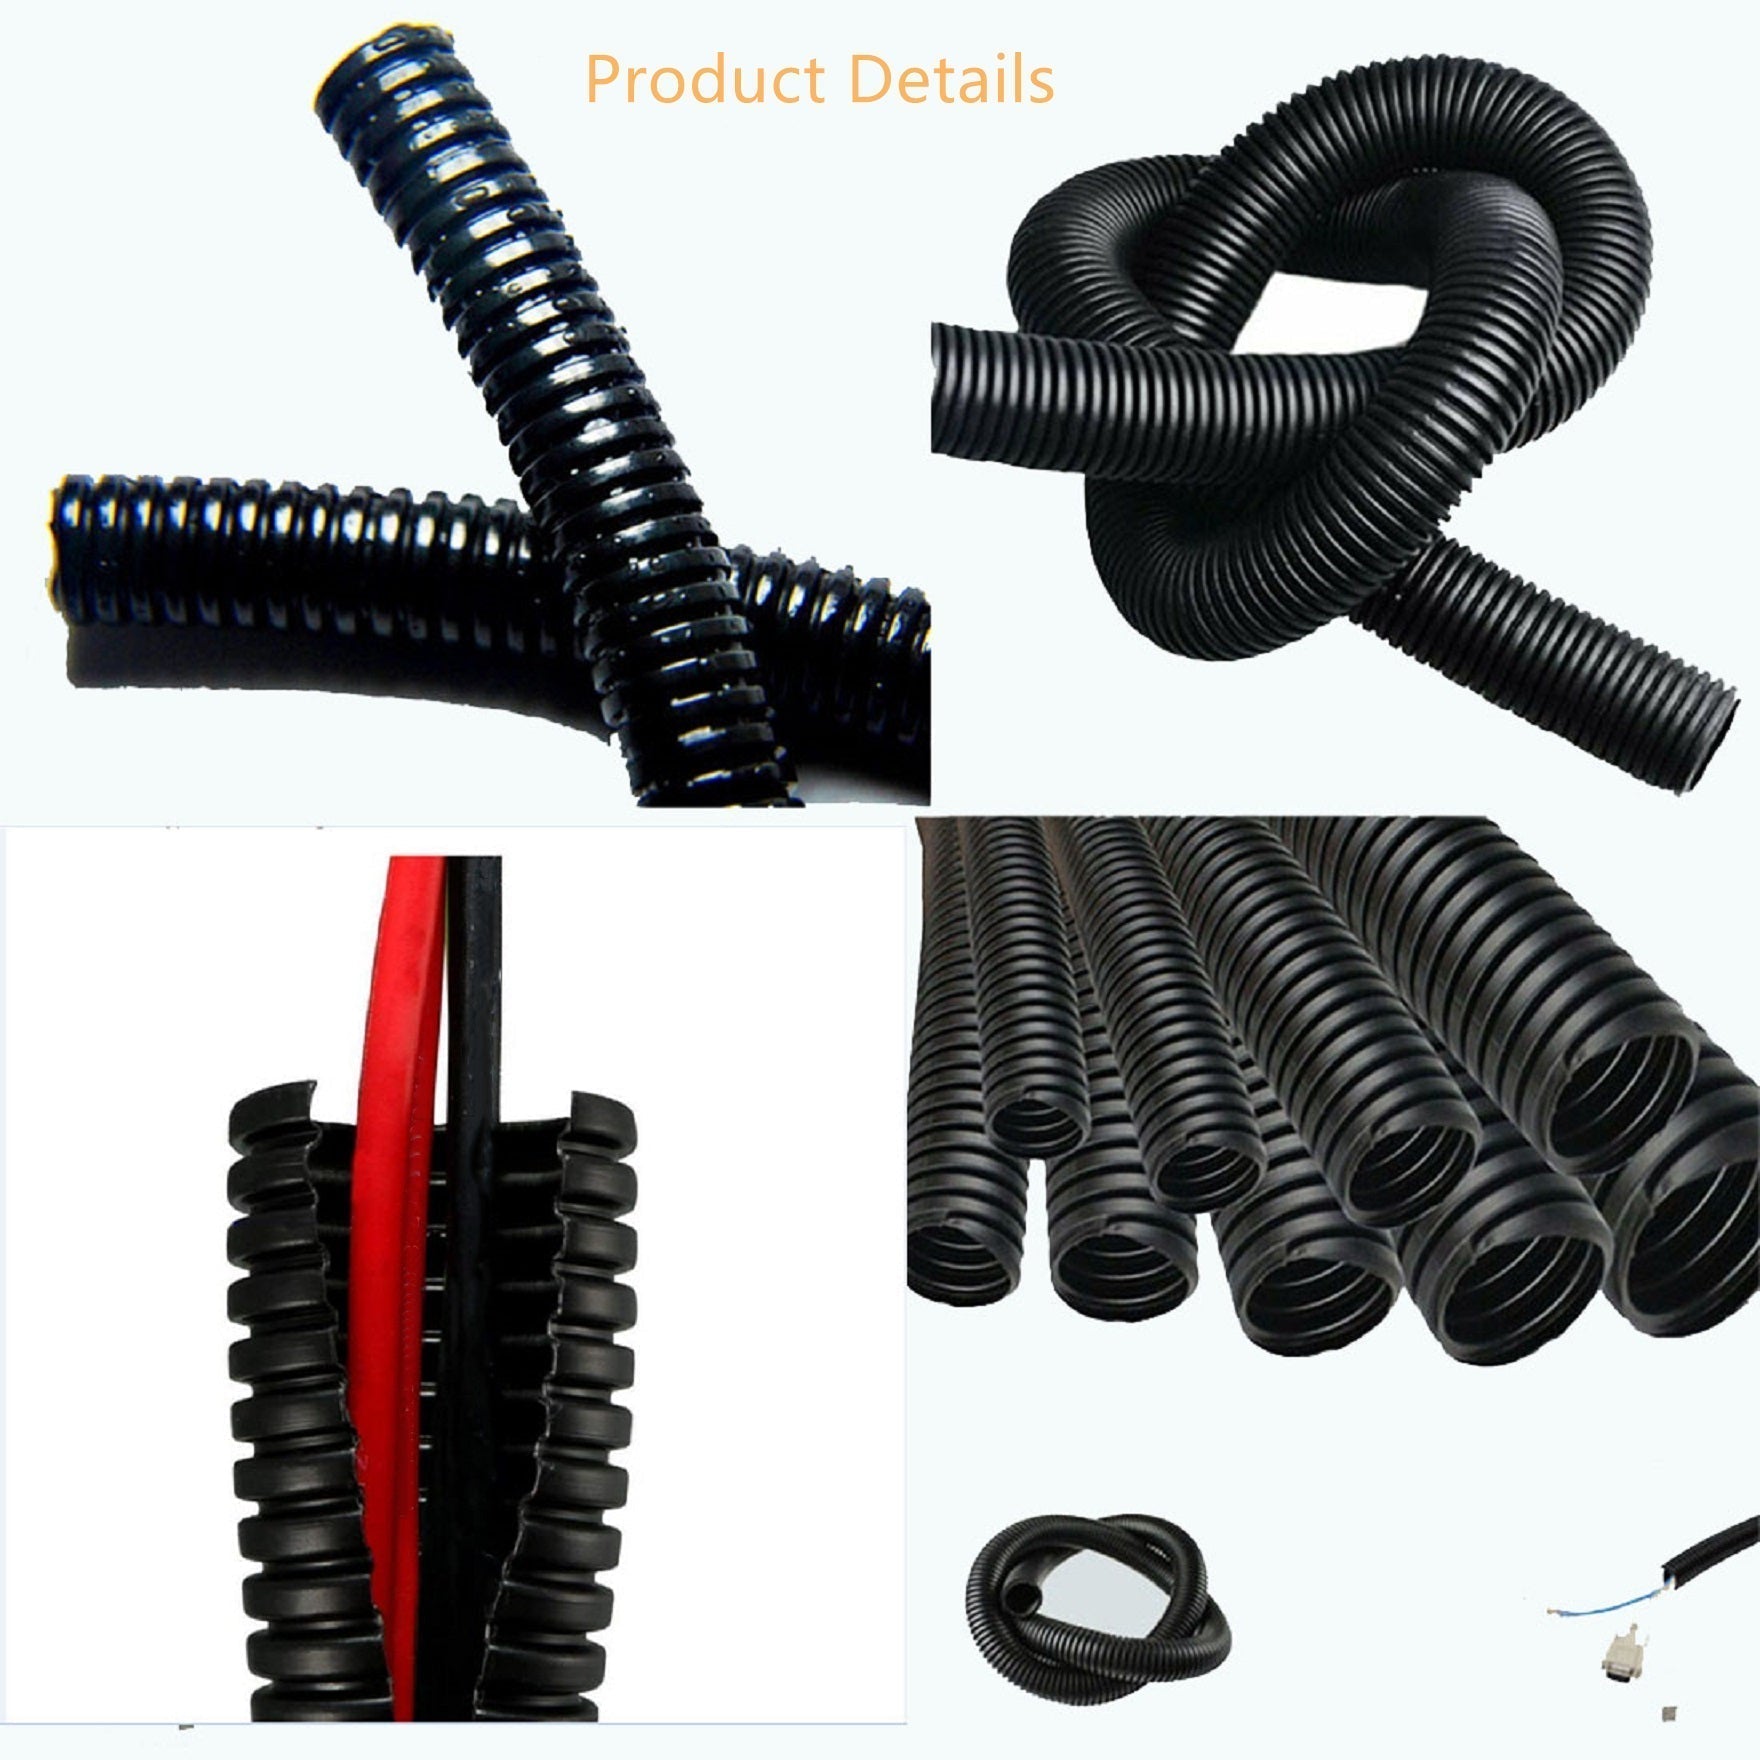 findmall Polyethylene Wire Loom Flex Tubing Cable Conduit Protective Black (32ft-1/2") FINDMALLPARTS